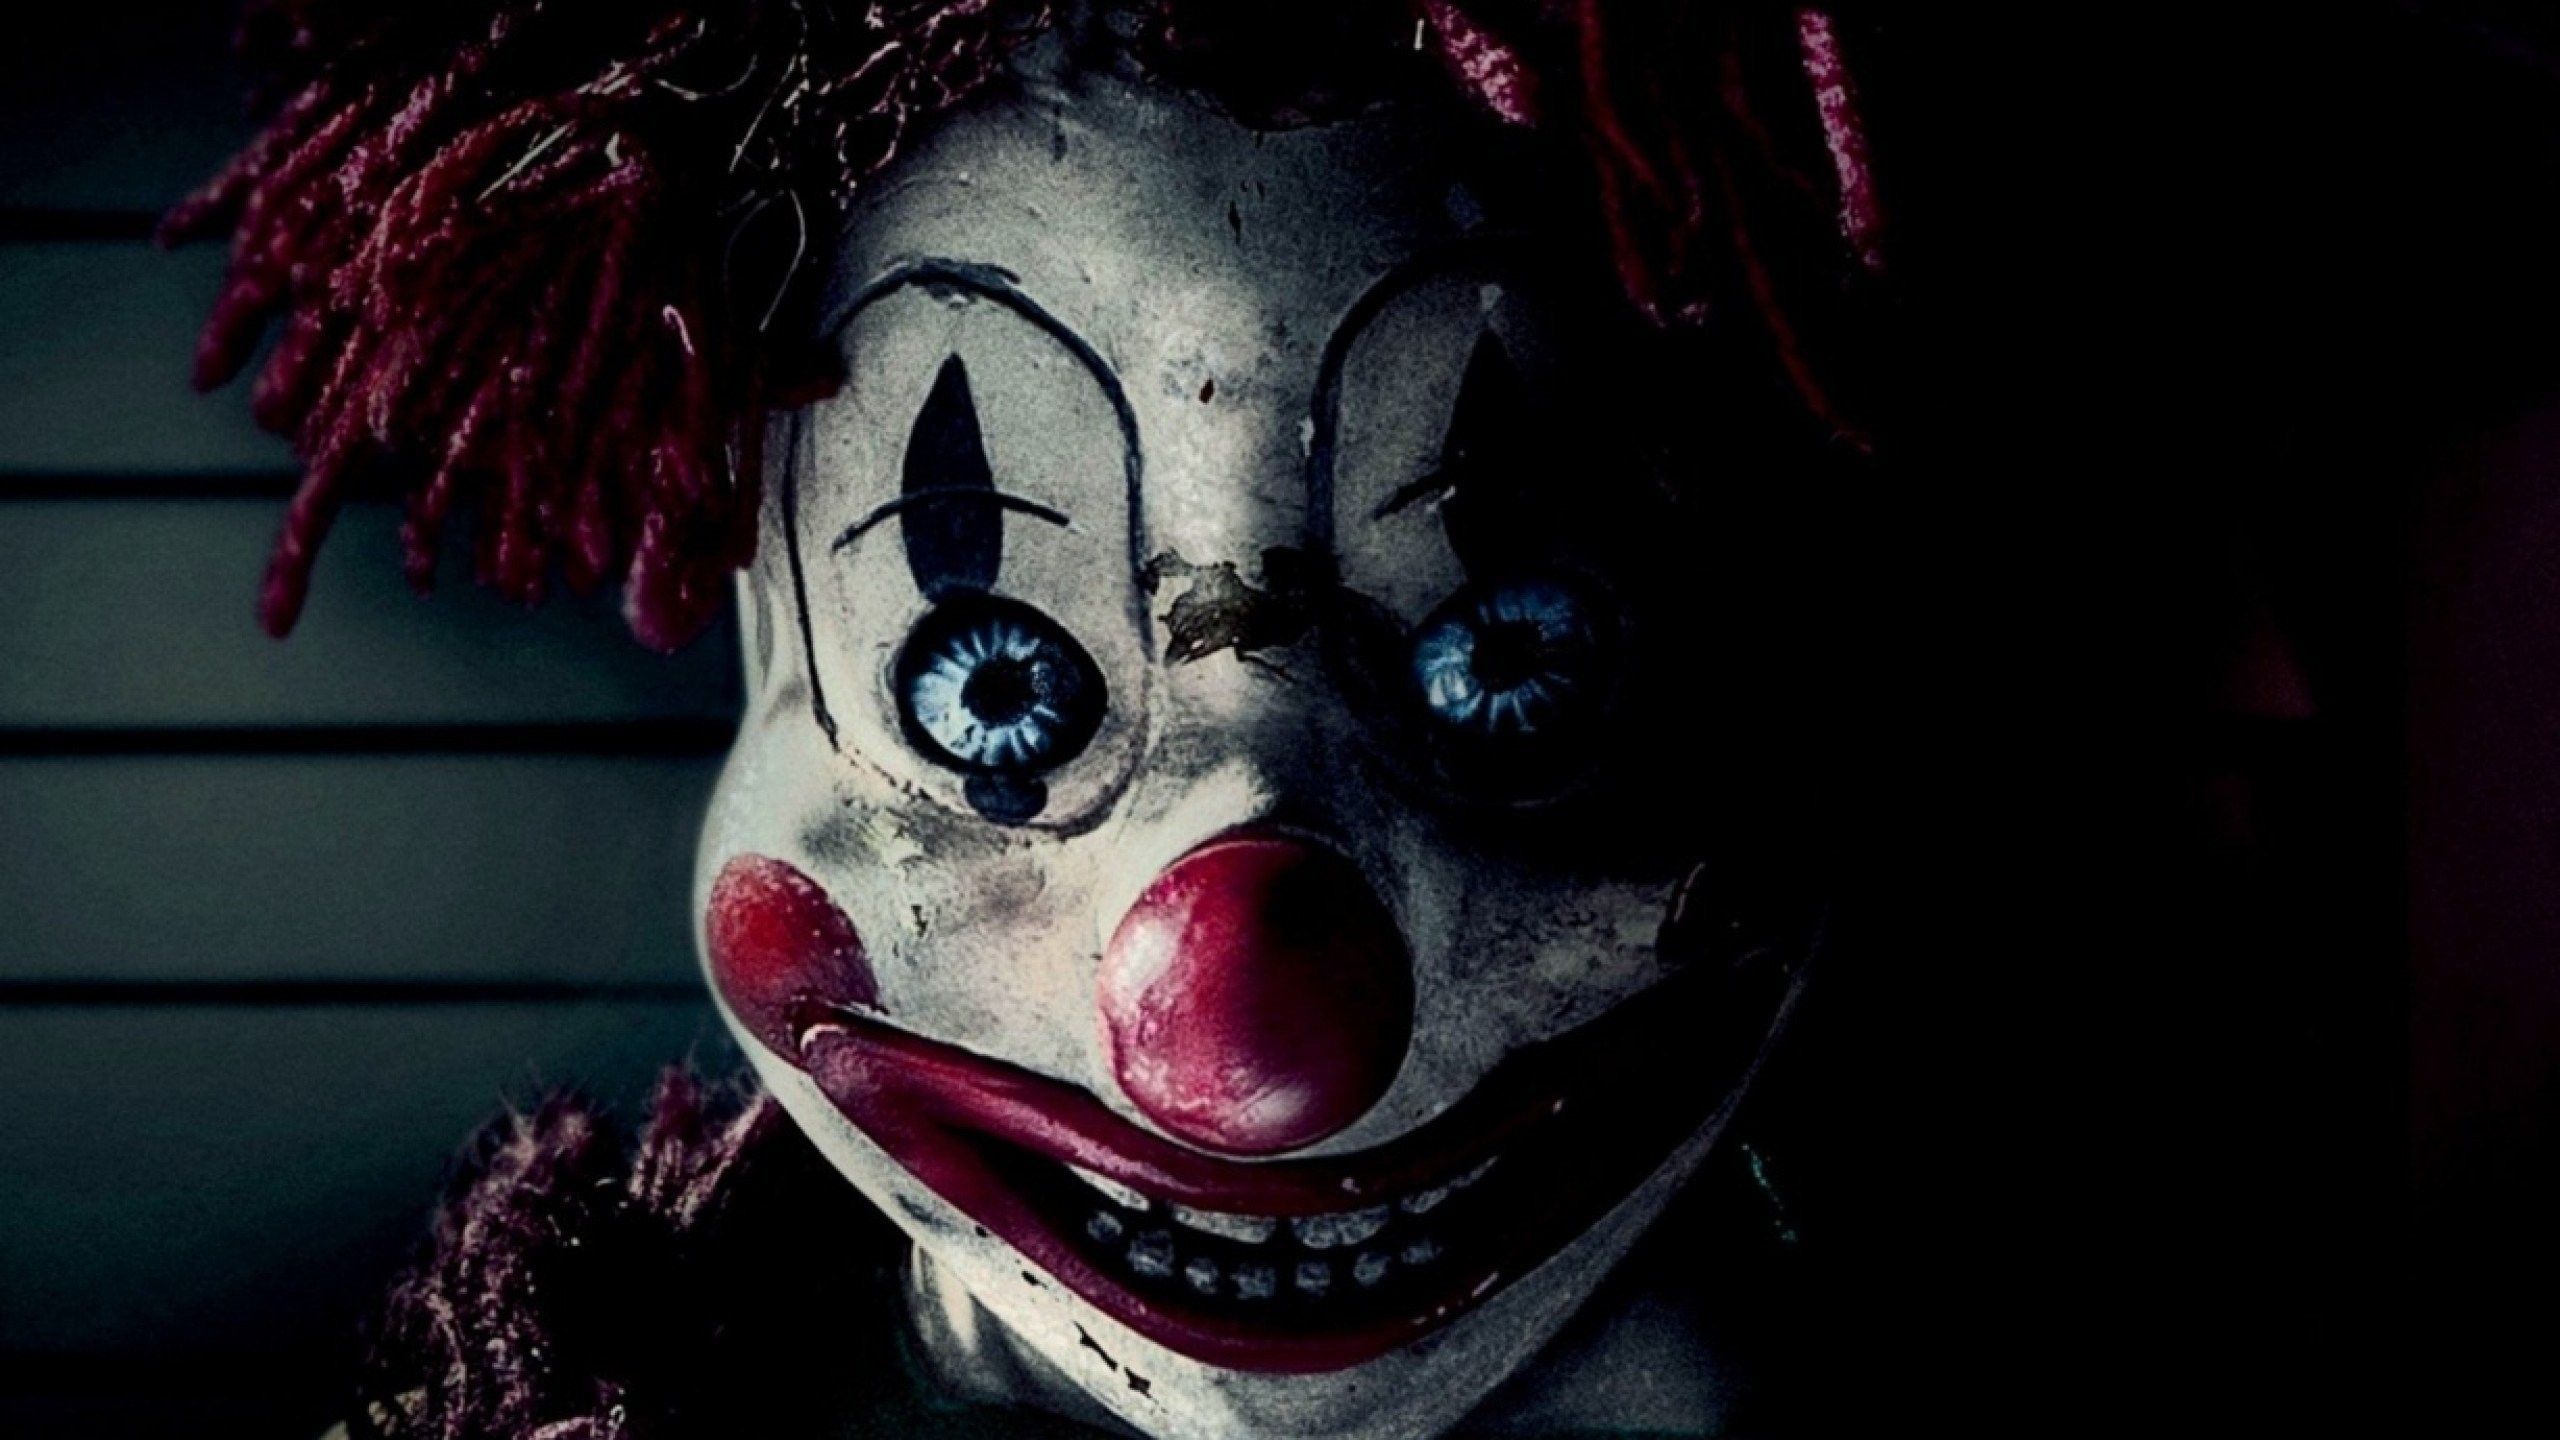 A scary clown doll with red hair and big eyes - Horror